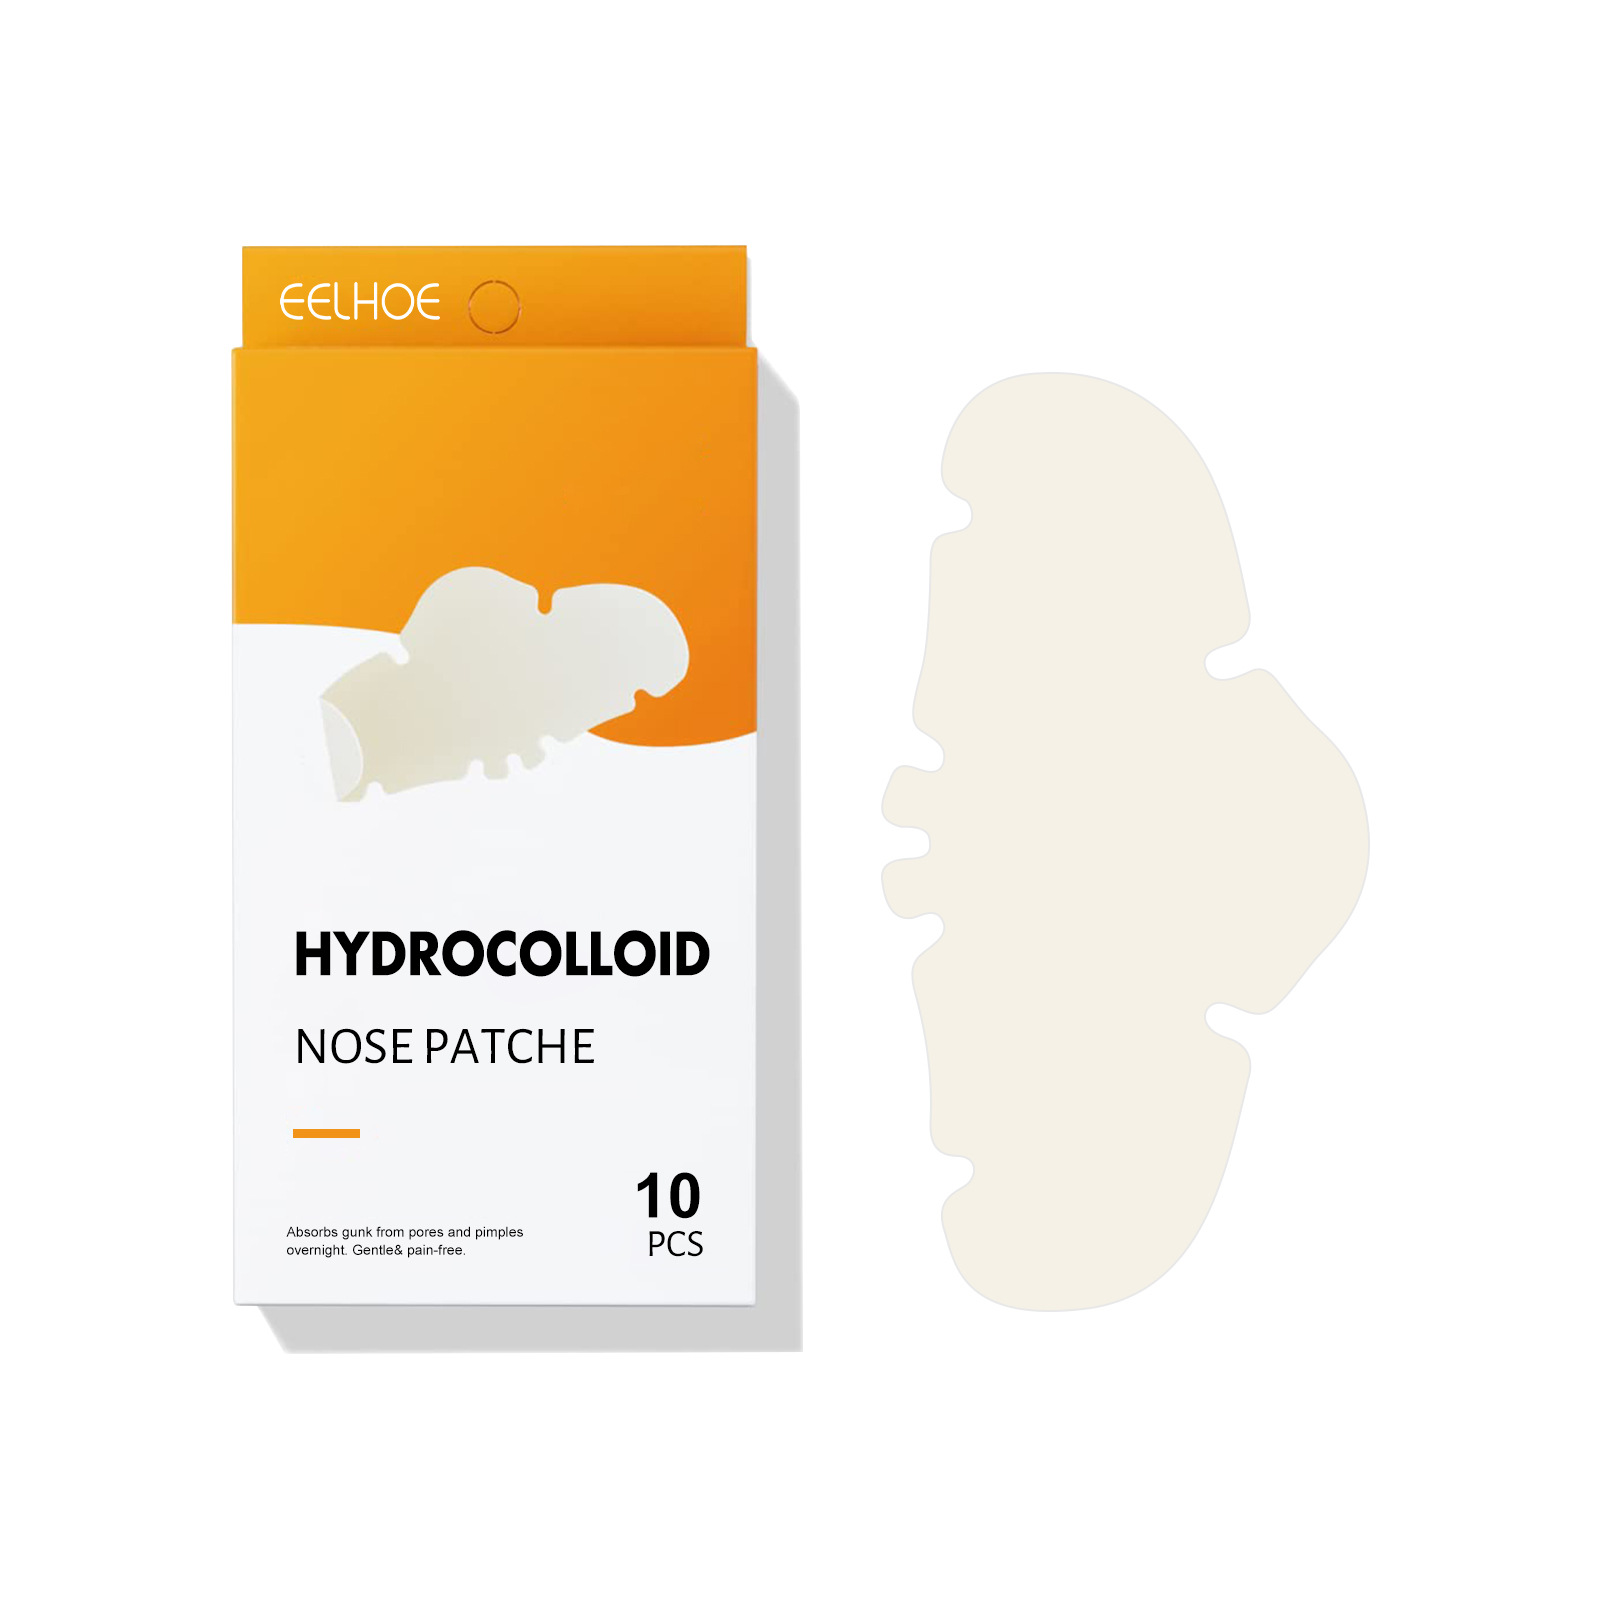 Hydrocolloid Nose Patche